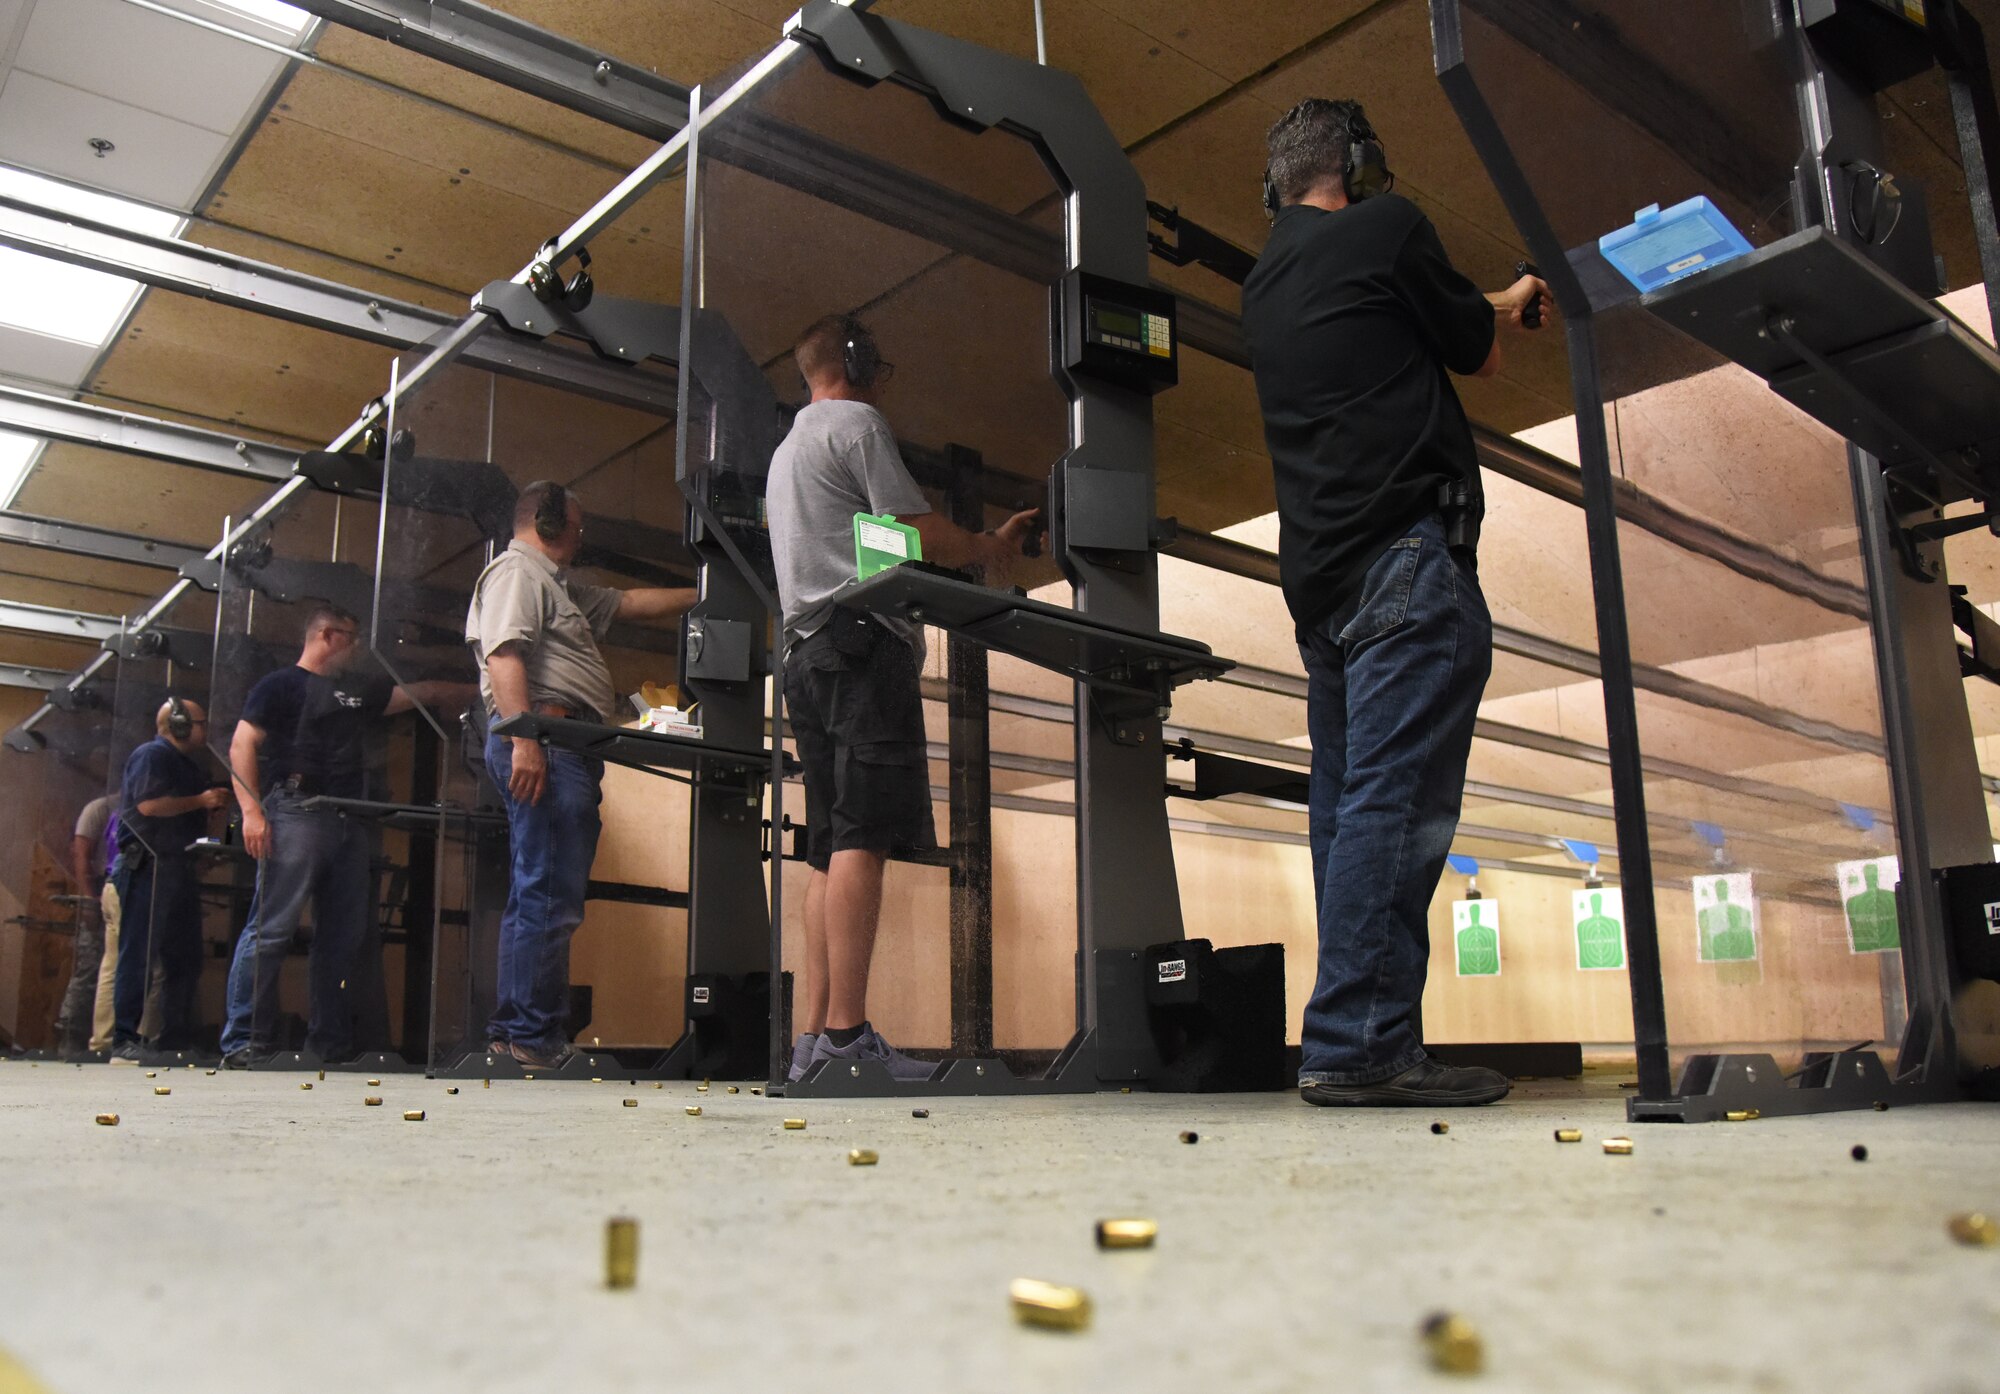 Keesler personnel and members of the local law enforcement participate in the 81st Security Forces Squadron law enforcement team competition shoot in the indoor firing range at Keesler Air Force Base, Mississippi, May 16, 2018. The event was held during National Police Week, which recognizes the service of law enforcement men and women who put their lives at risk every day. (U.S. Air Force photo by Kemberly Groue)